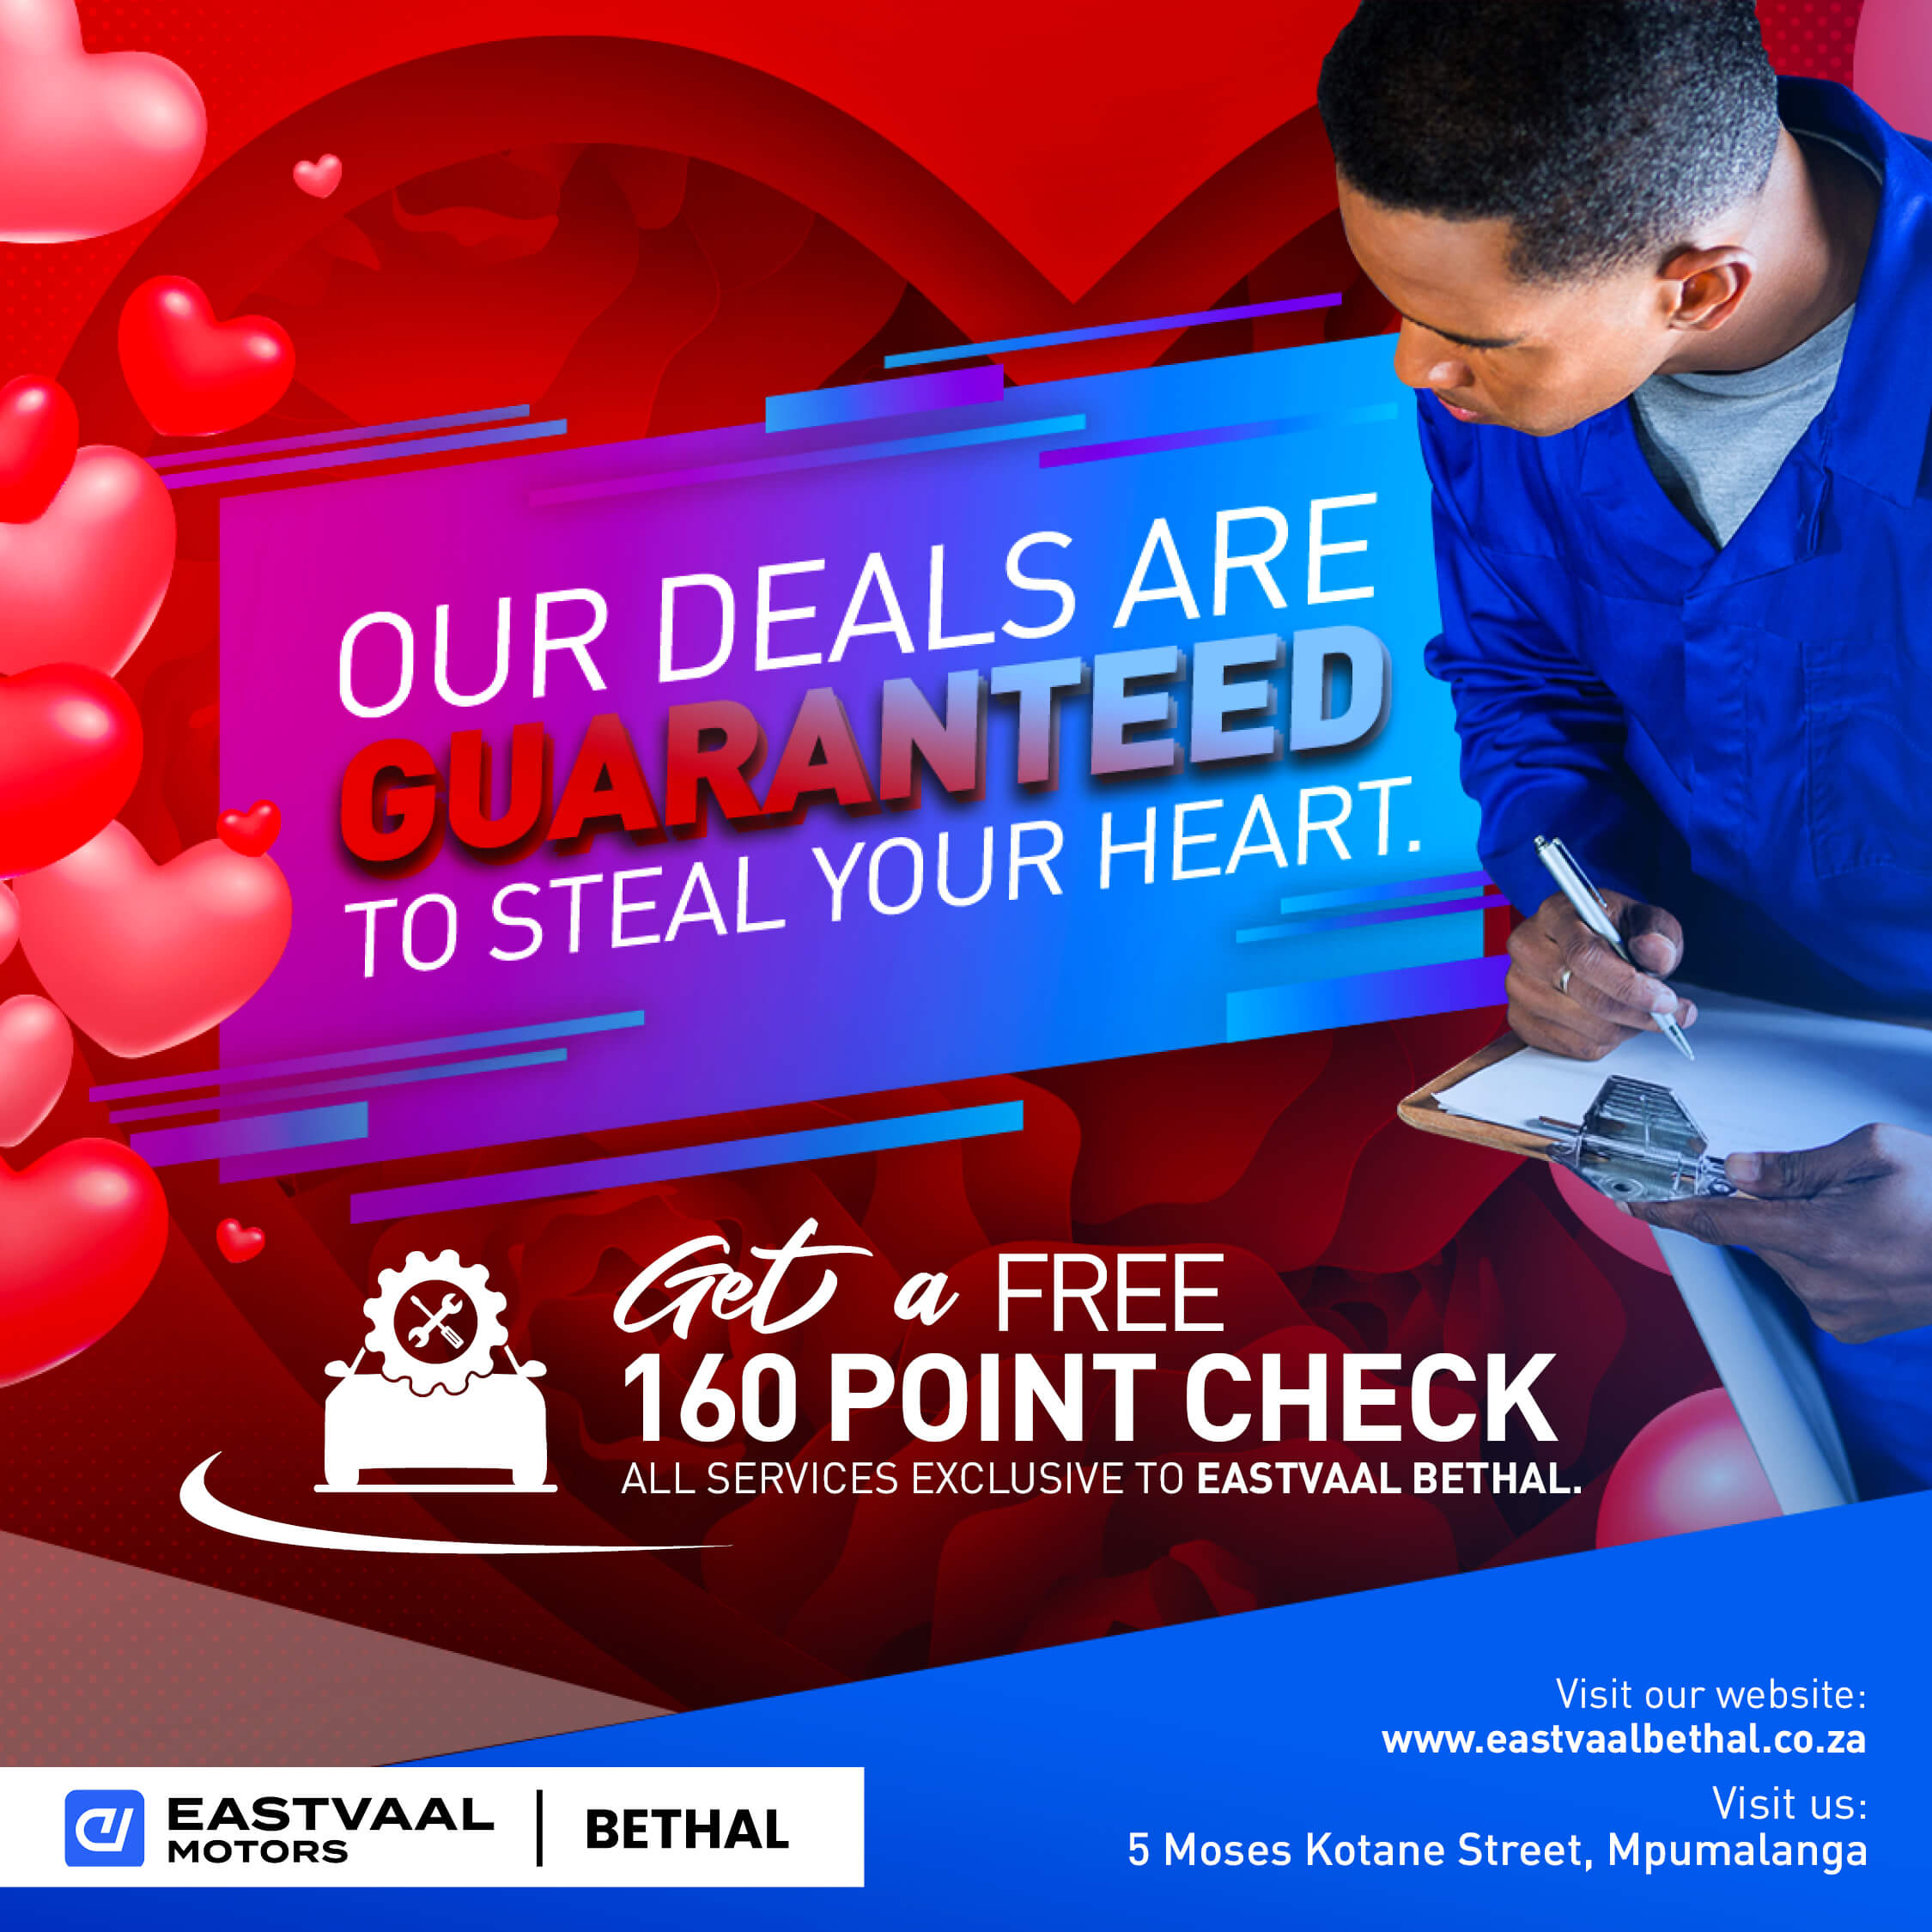 OUR DEALS ARE GUARANTEED TO STEAL YOUR HEART image from 